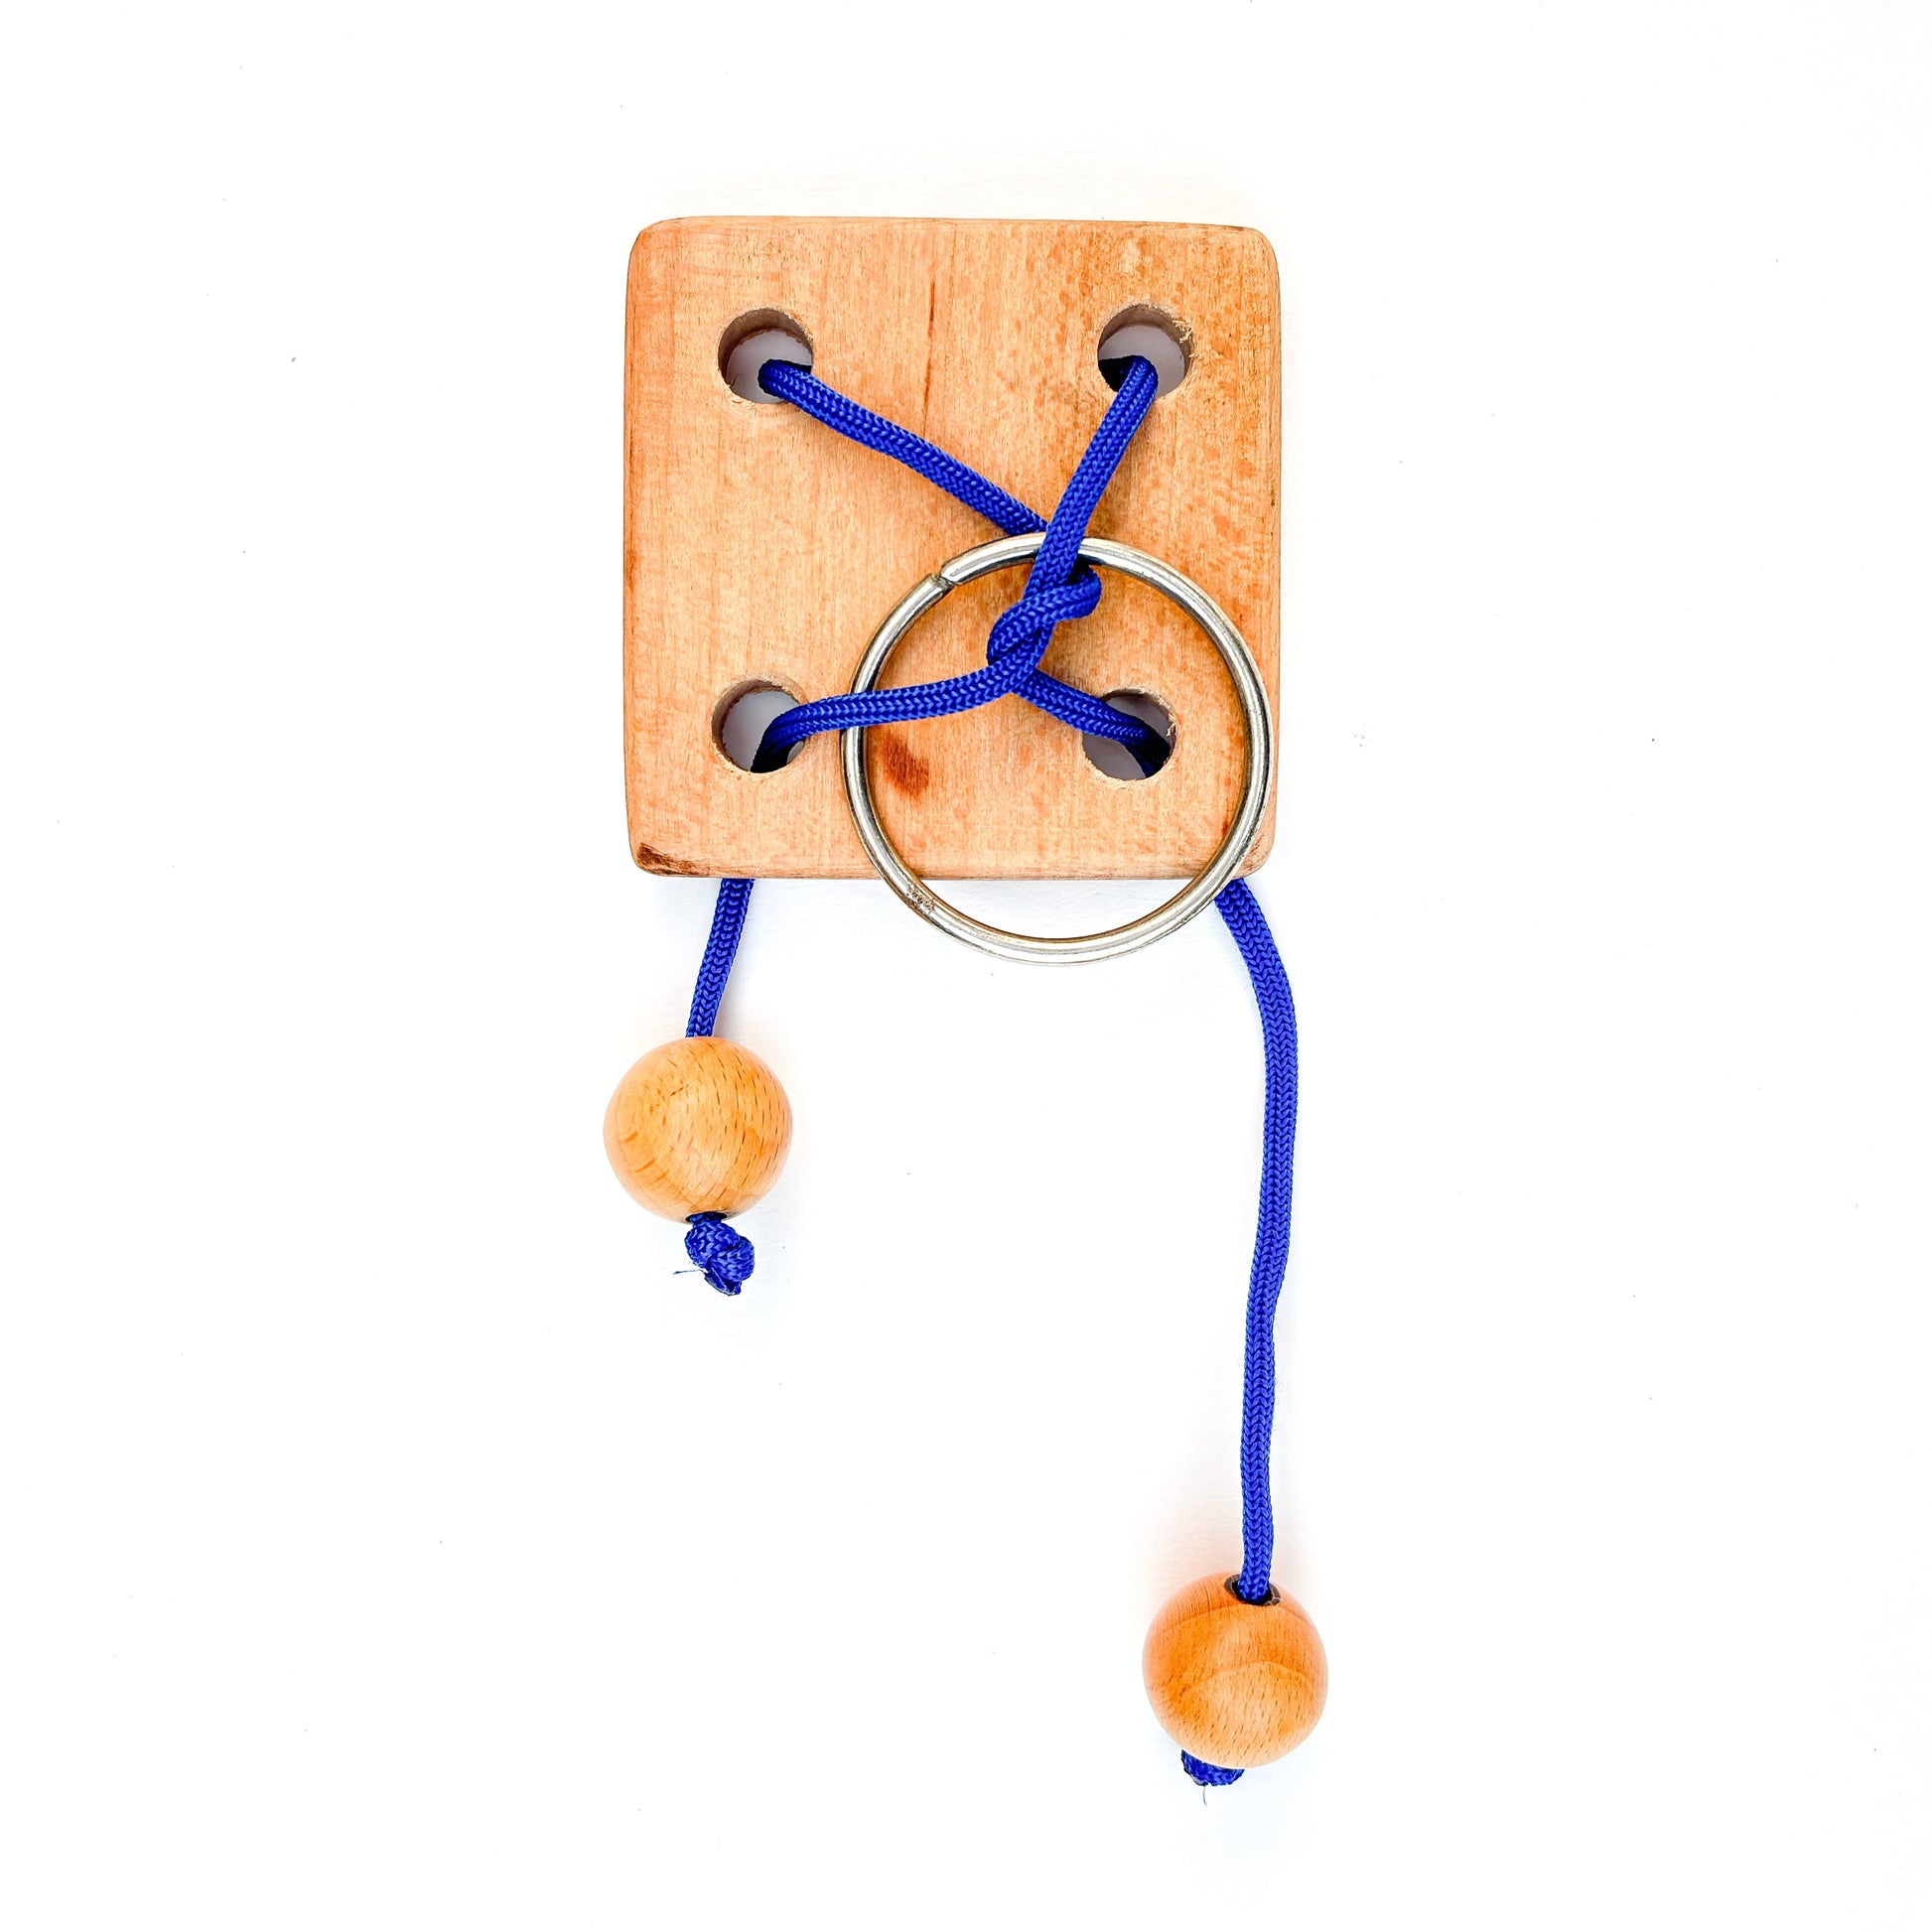 Wooden puzzle with blue rope and ring on white background. This classic brain teaser toy challenges players to manipulate the rope to separate the ring from the puzzle.